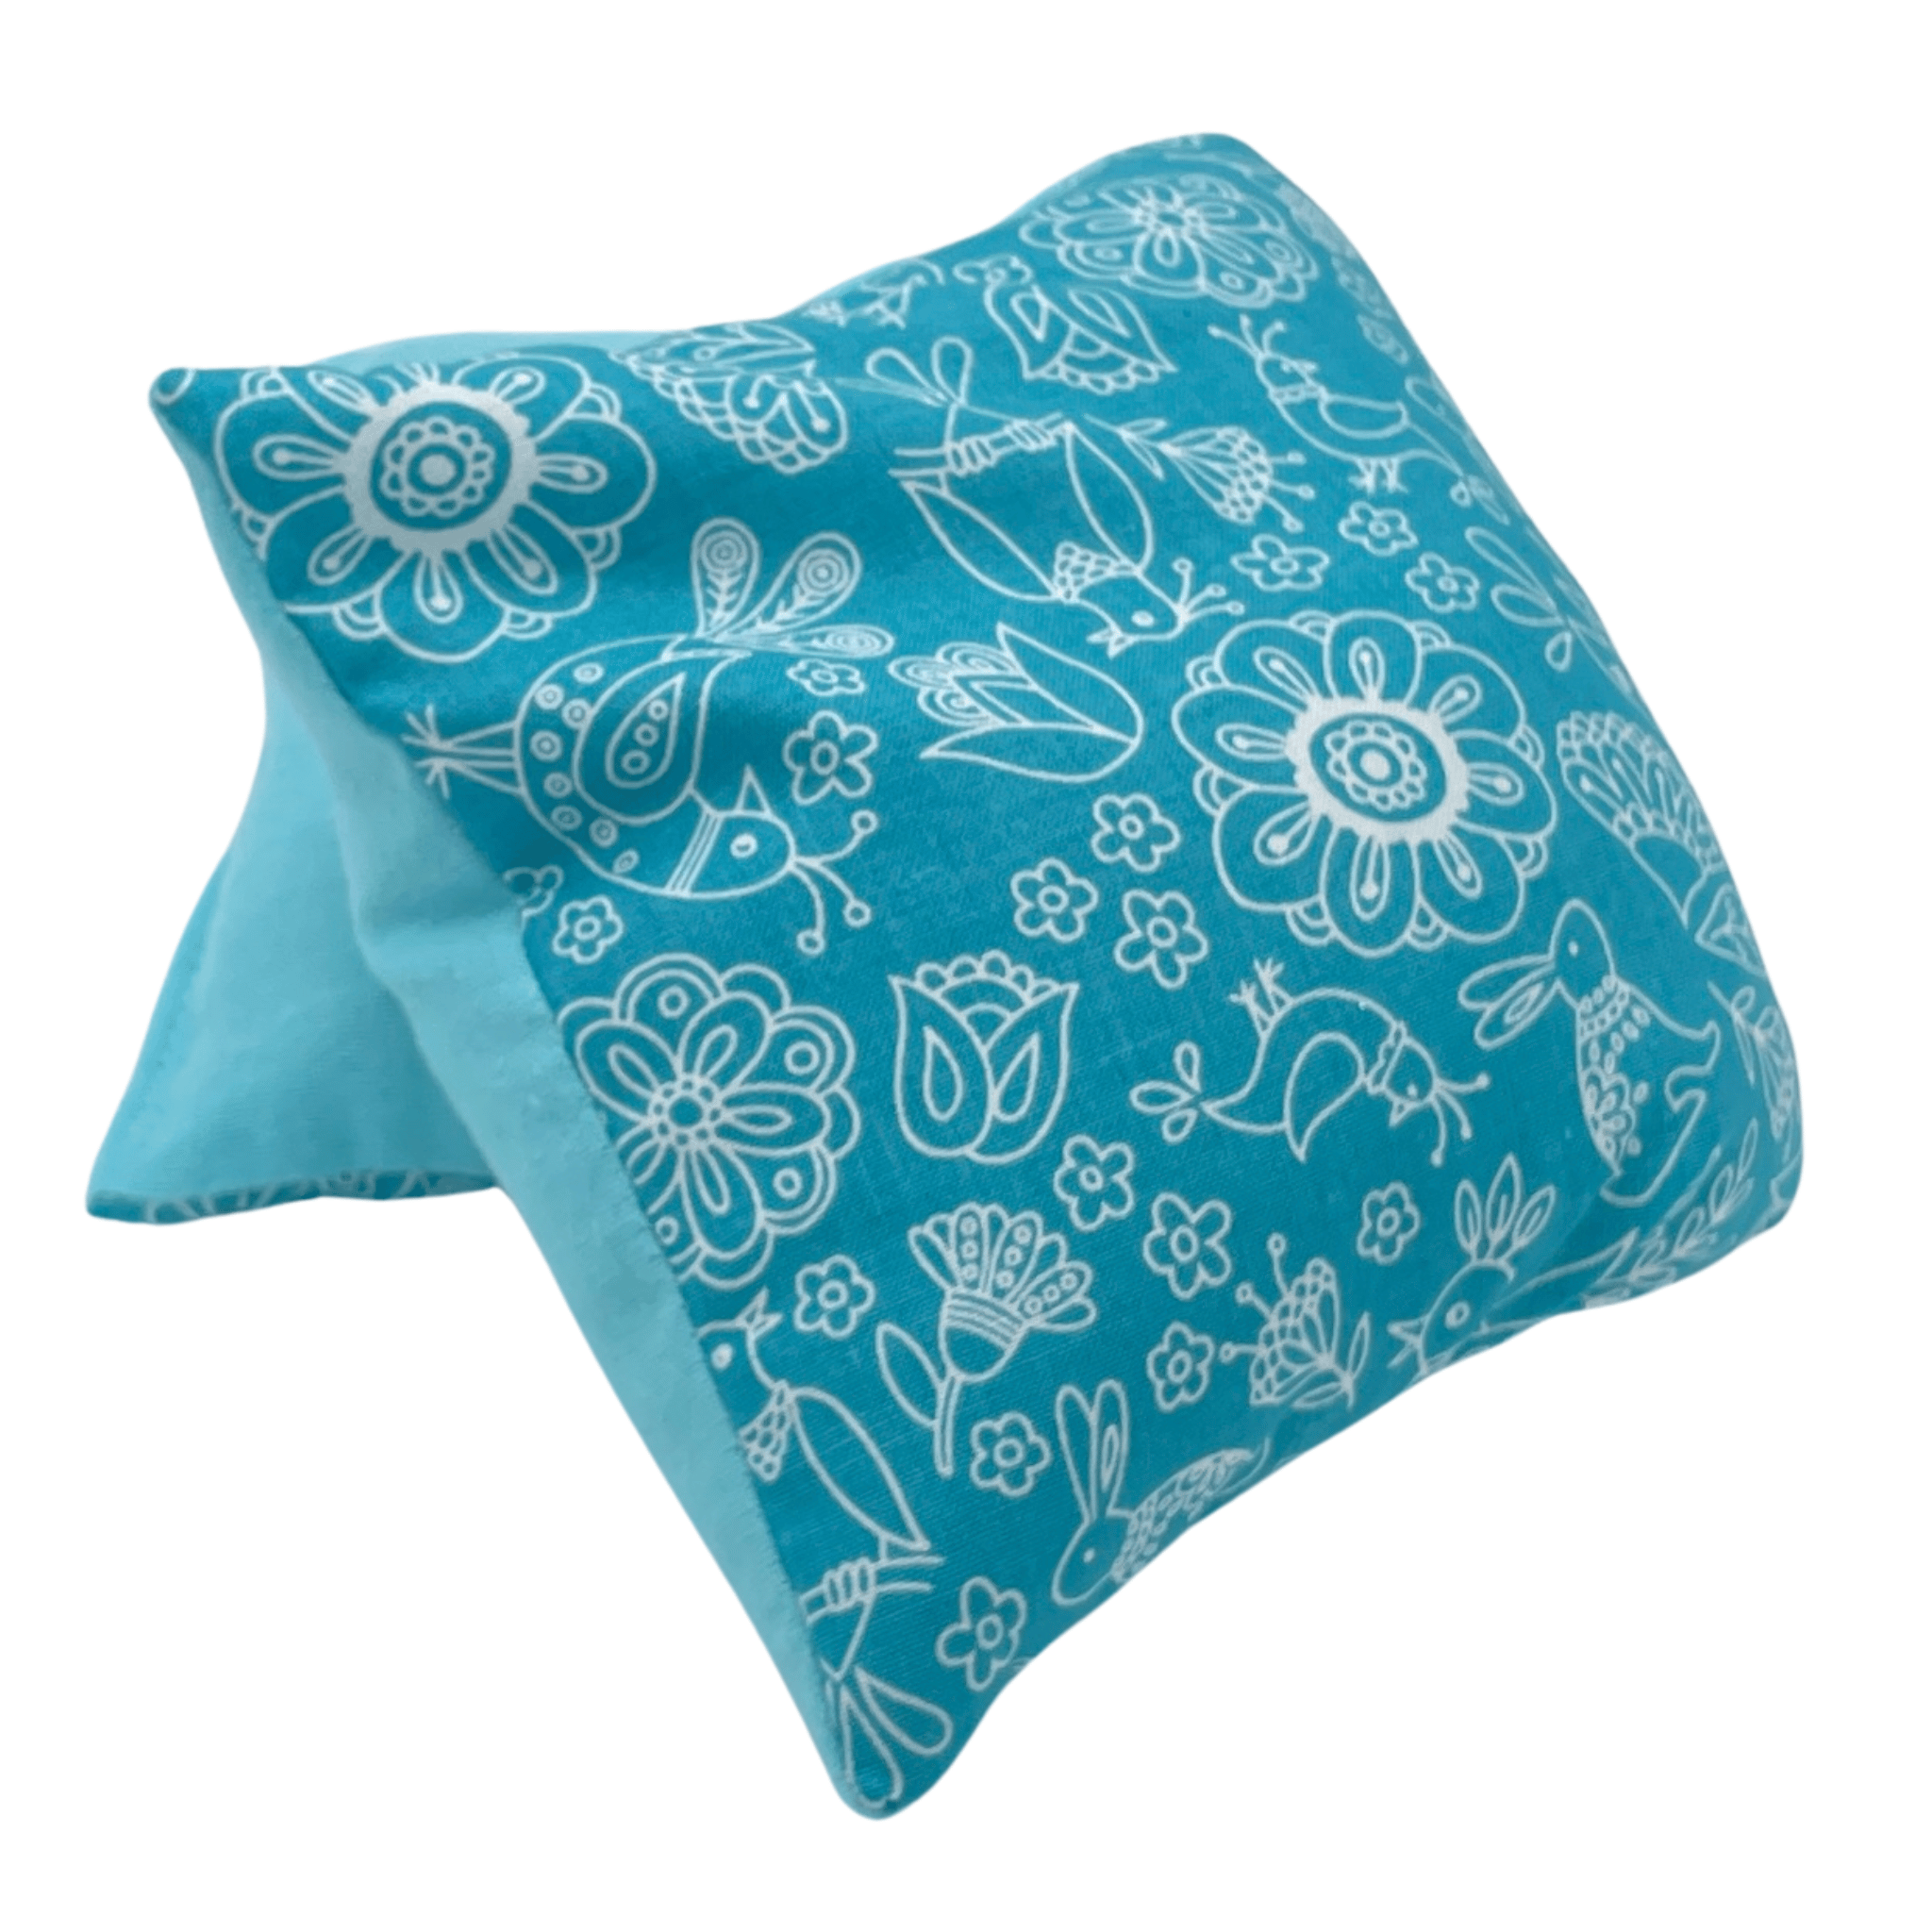 whiffy 6" x 12" microwavable heating pad hot and cold pack in blue and white floral fabric with blue flannel on the other side